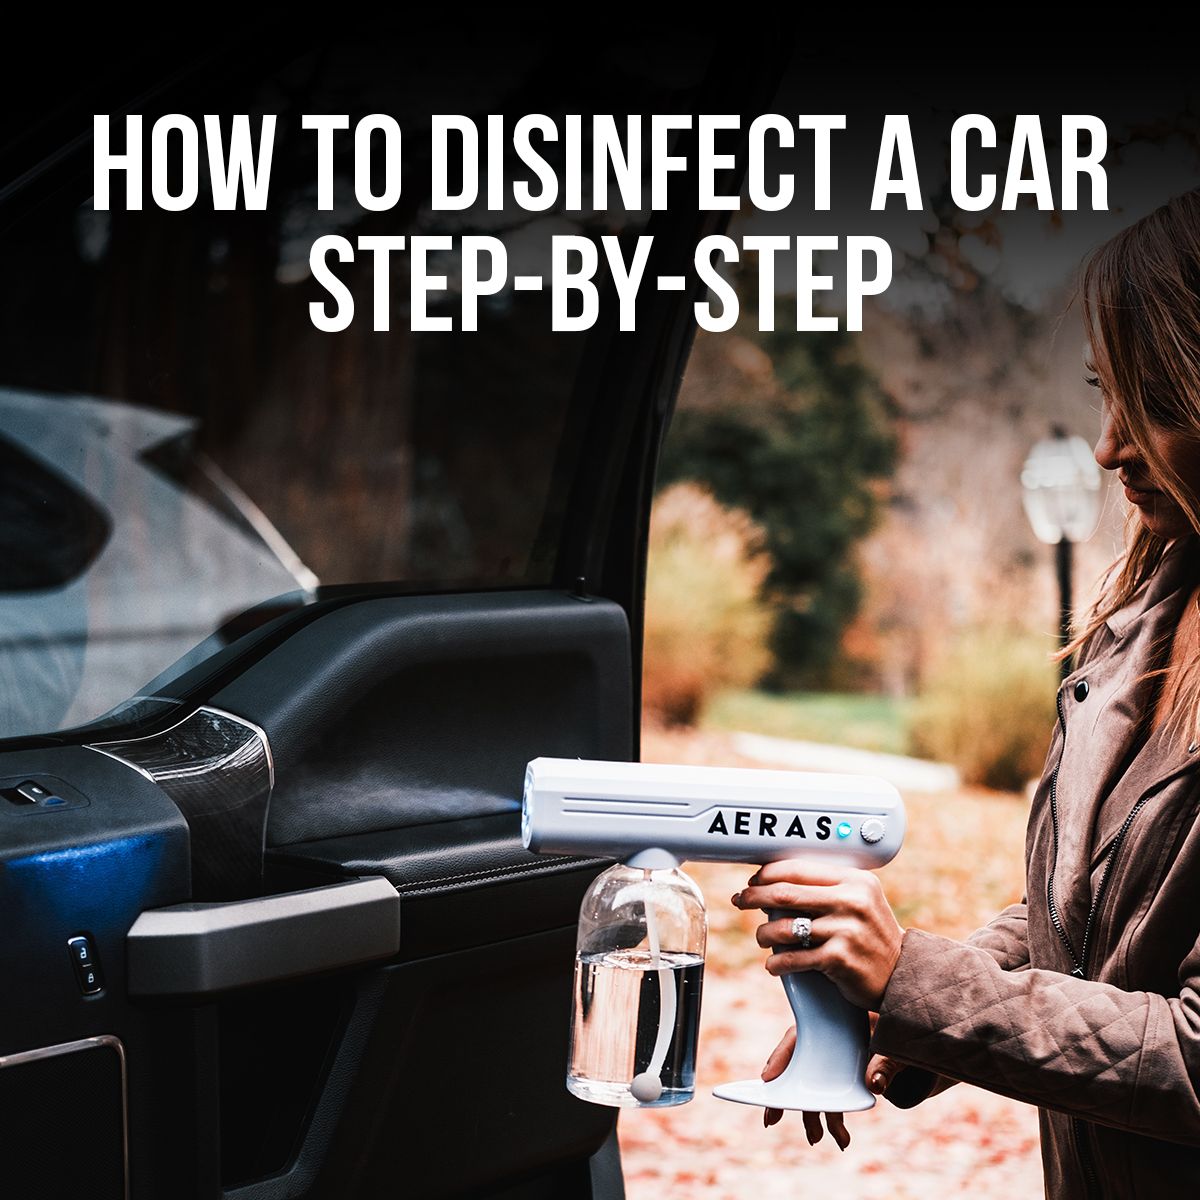 How To Disinfect a Car Step-by-Step